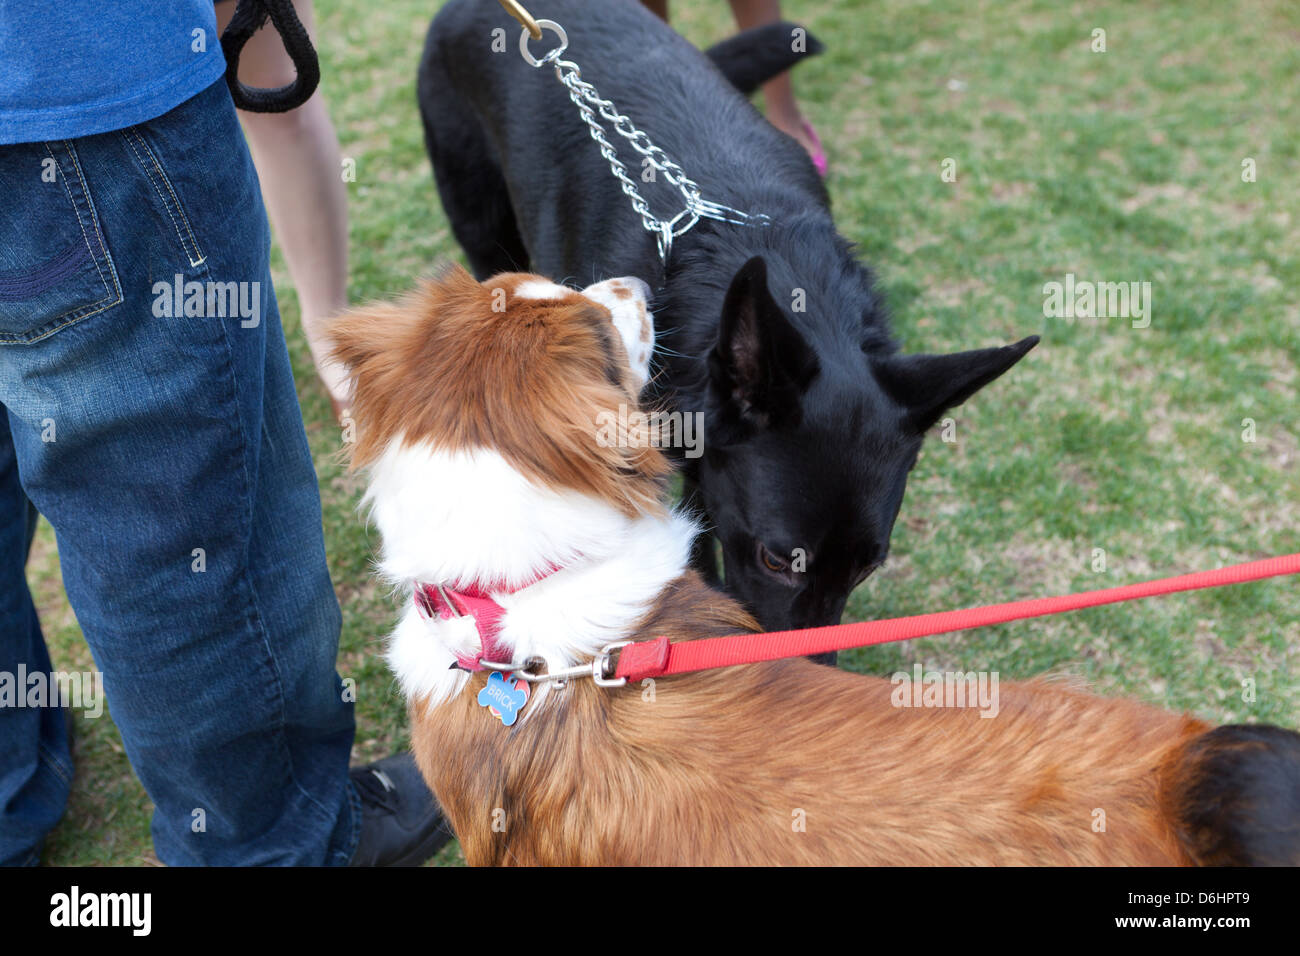 Two dogs sniffing each other Stock Photo